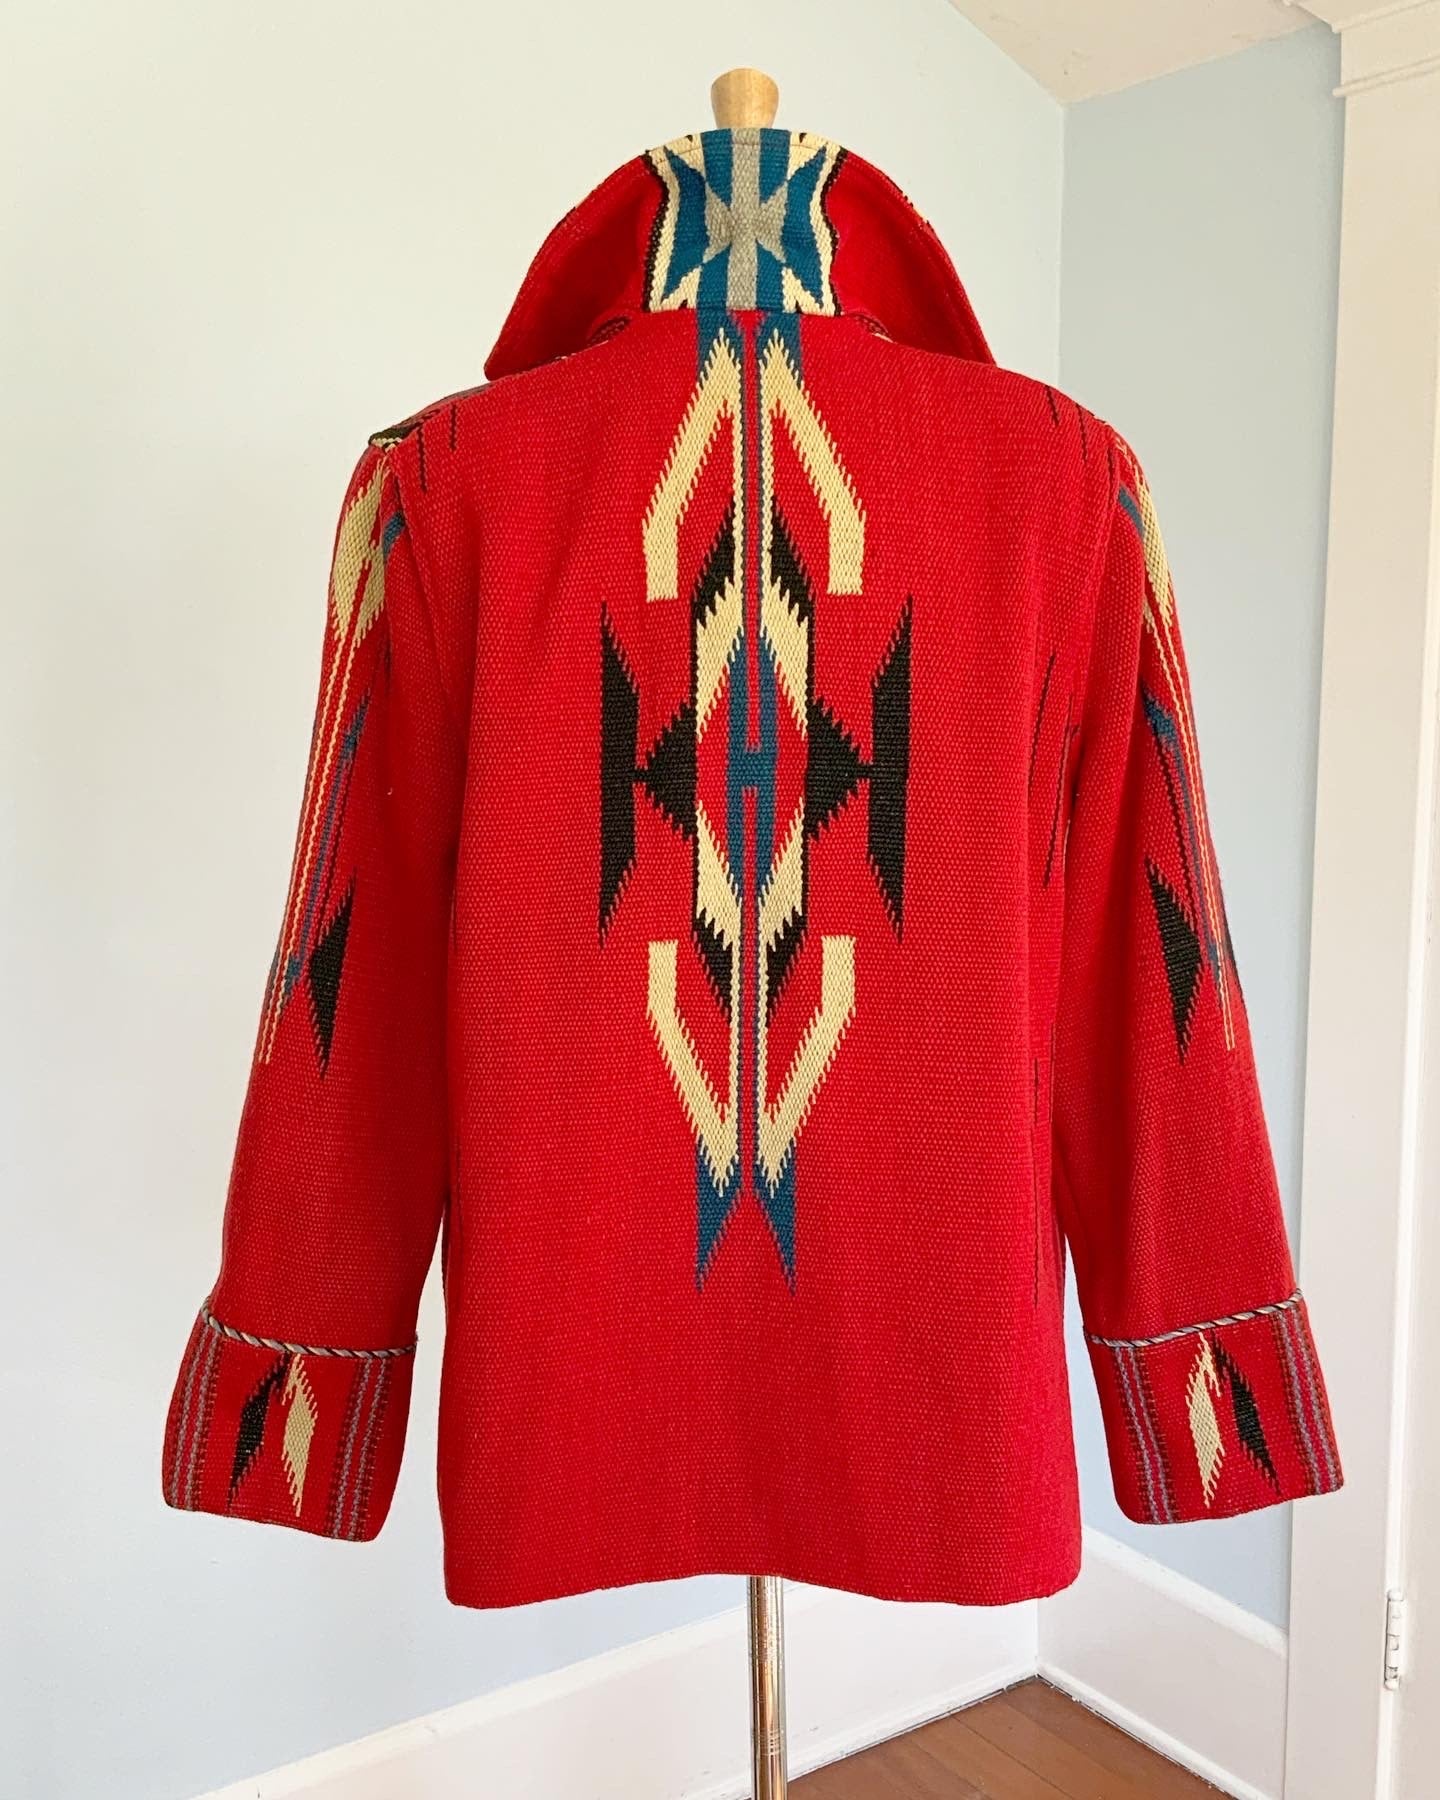 1940s Hand Woven Native American Chimayo Blanket Coat with Silver Concho Buttons by "Ganscraft"